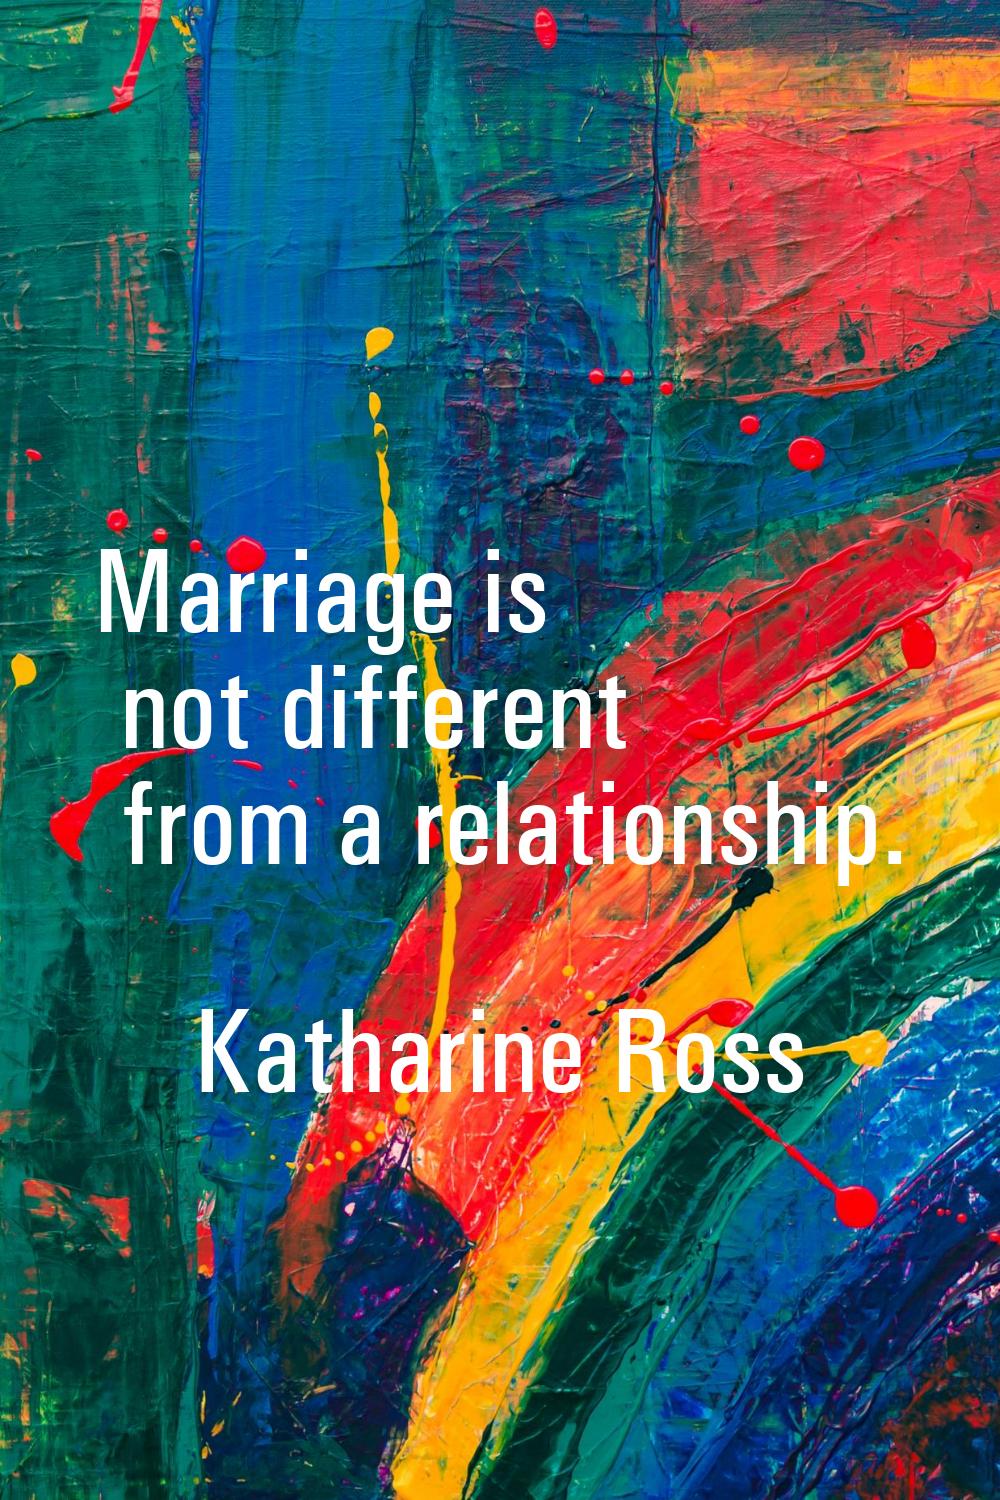 Marriage is not different from a relationship.